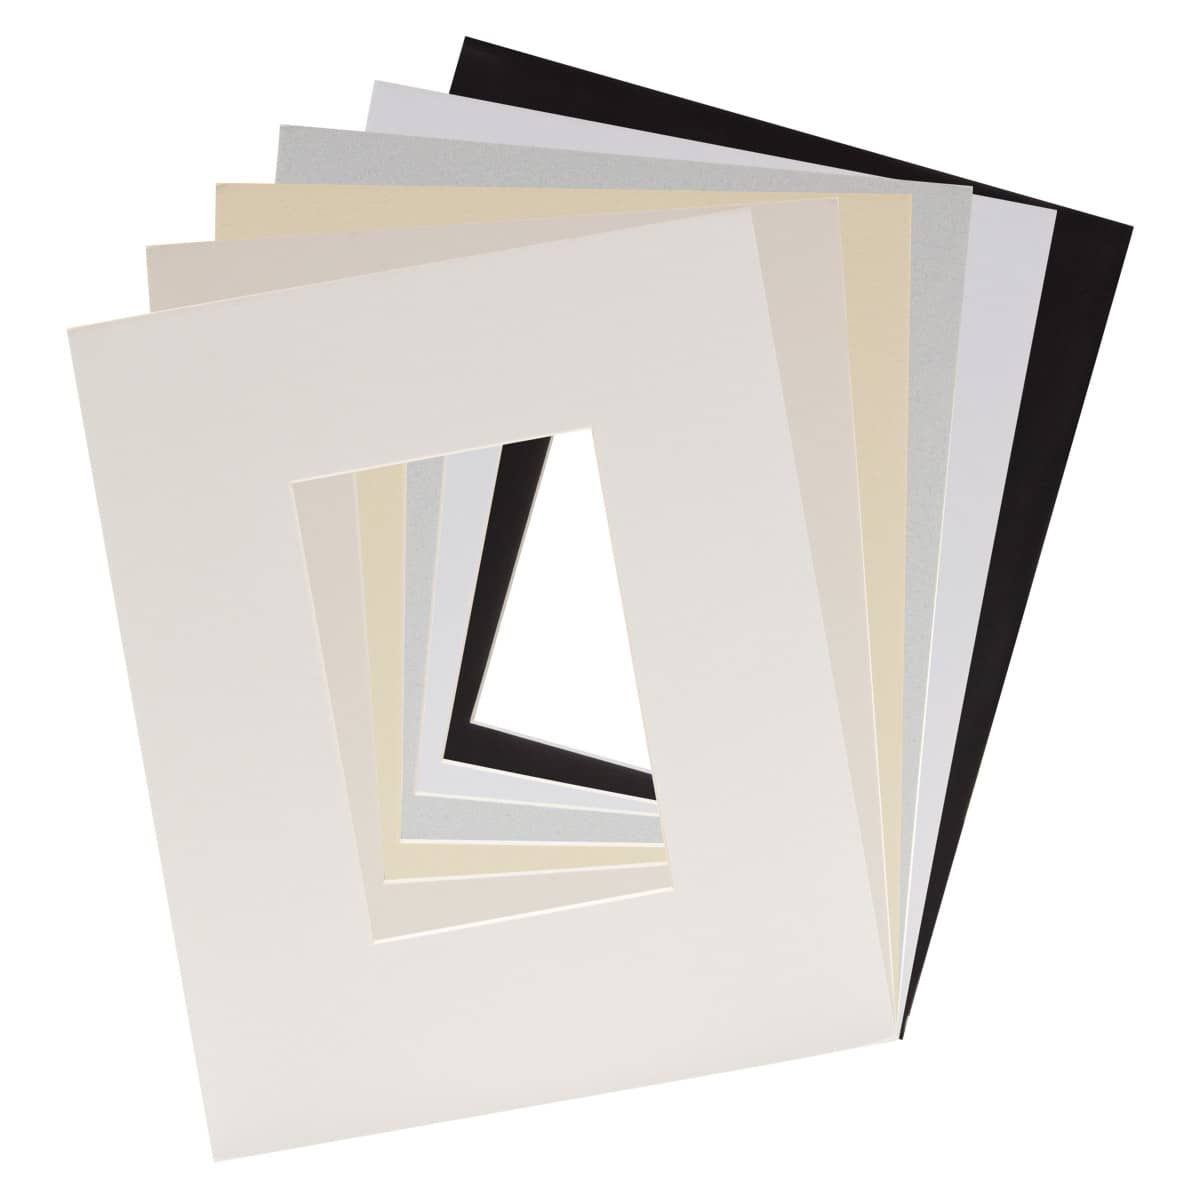 Foam Core Backing Board 3/8 White 20x24- 100 Pack. Many Sizes Available.  Acid Free Buffered Craft Poster Board for Signs, Presentations, School